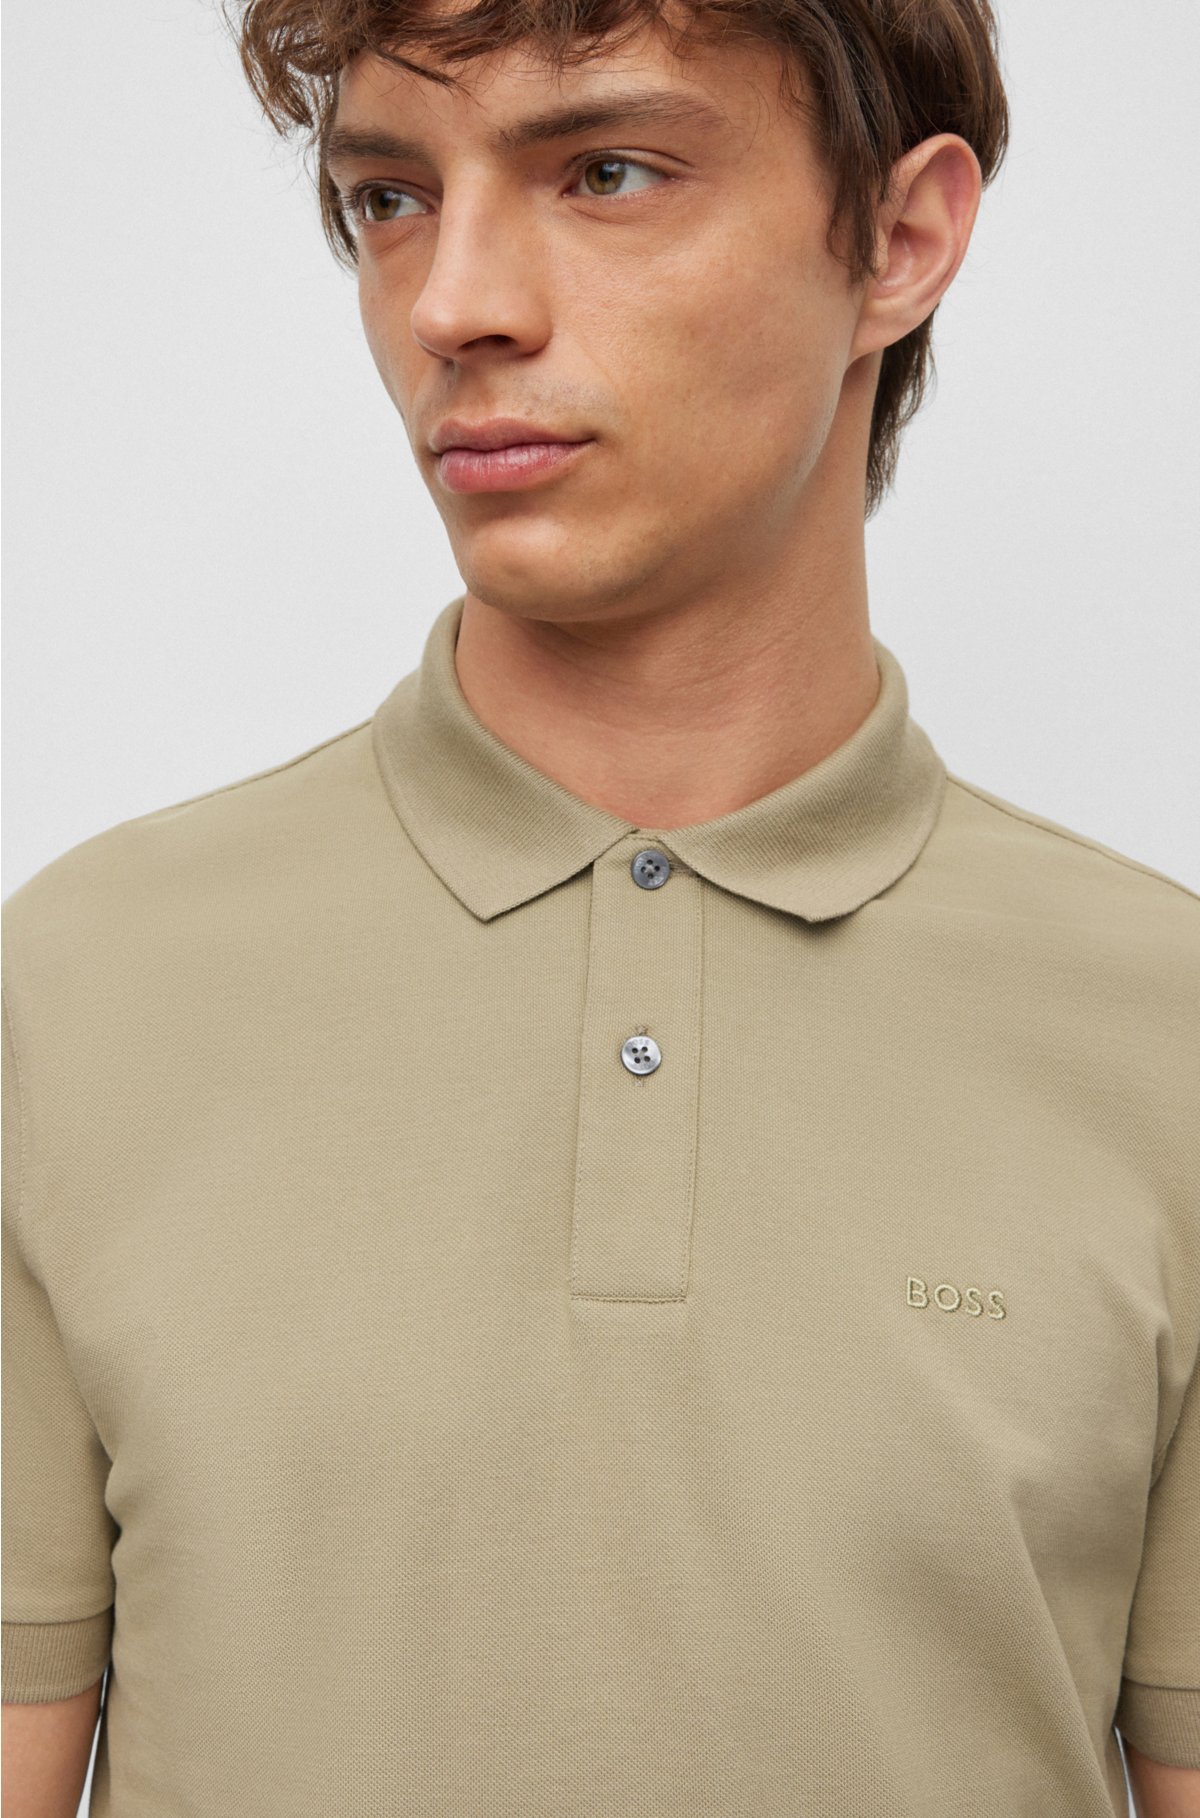 BOSS - Cotton shirt embroidered polo with logo